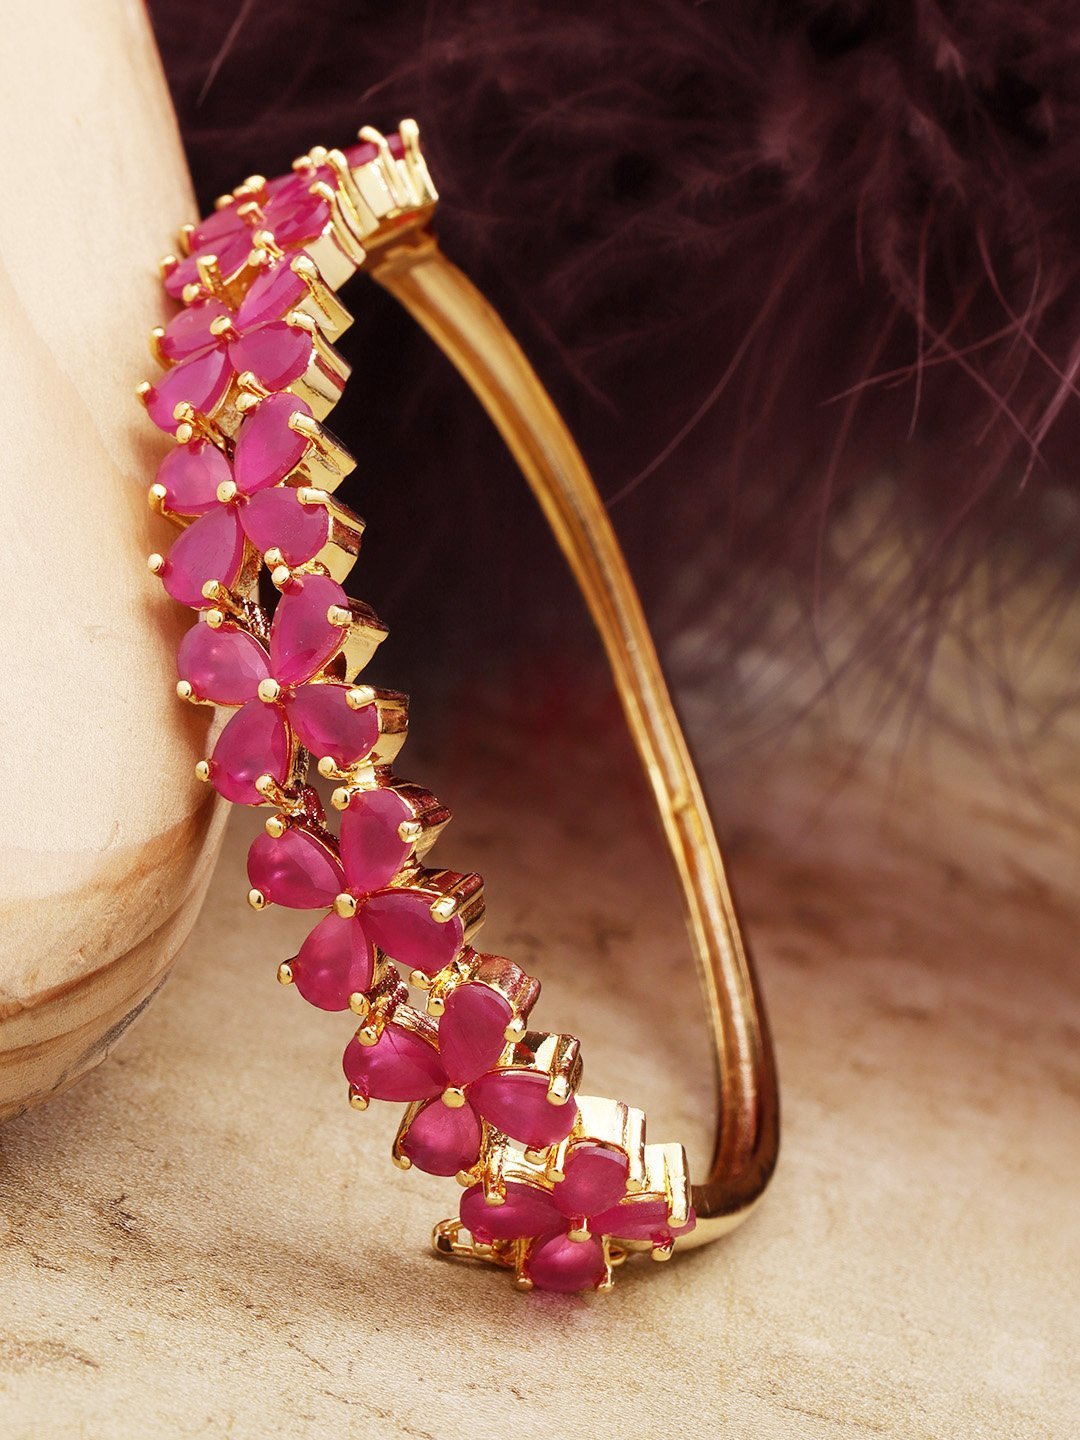 Women's Ruby Stones Studded Gold-Plated Bracelet in Floral Pattern - Priyaasi